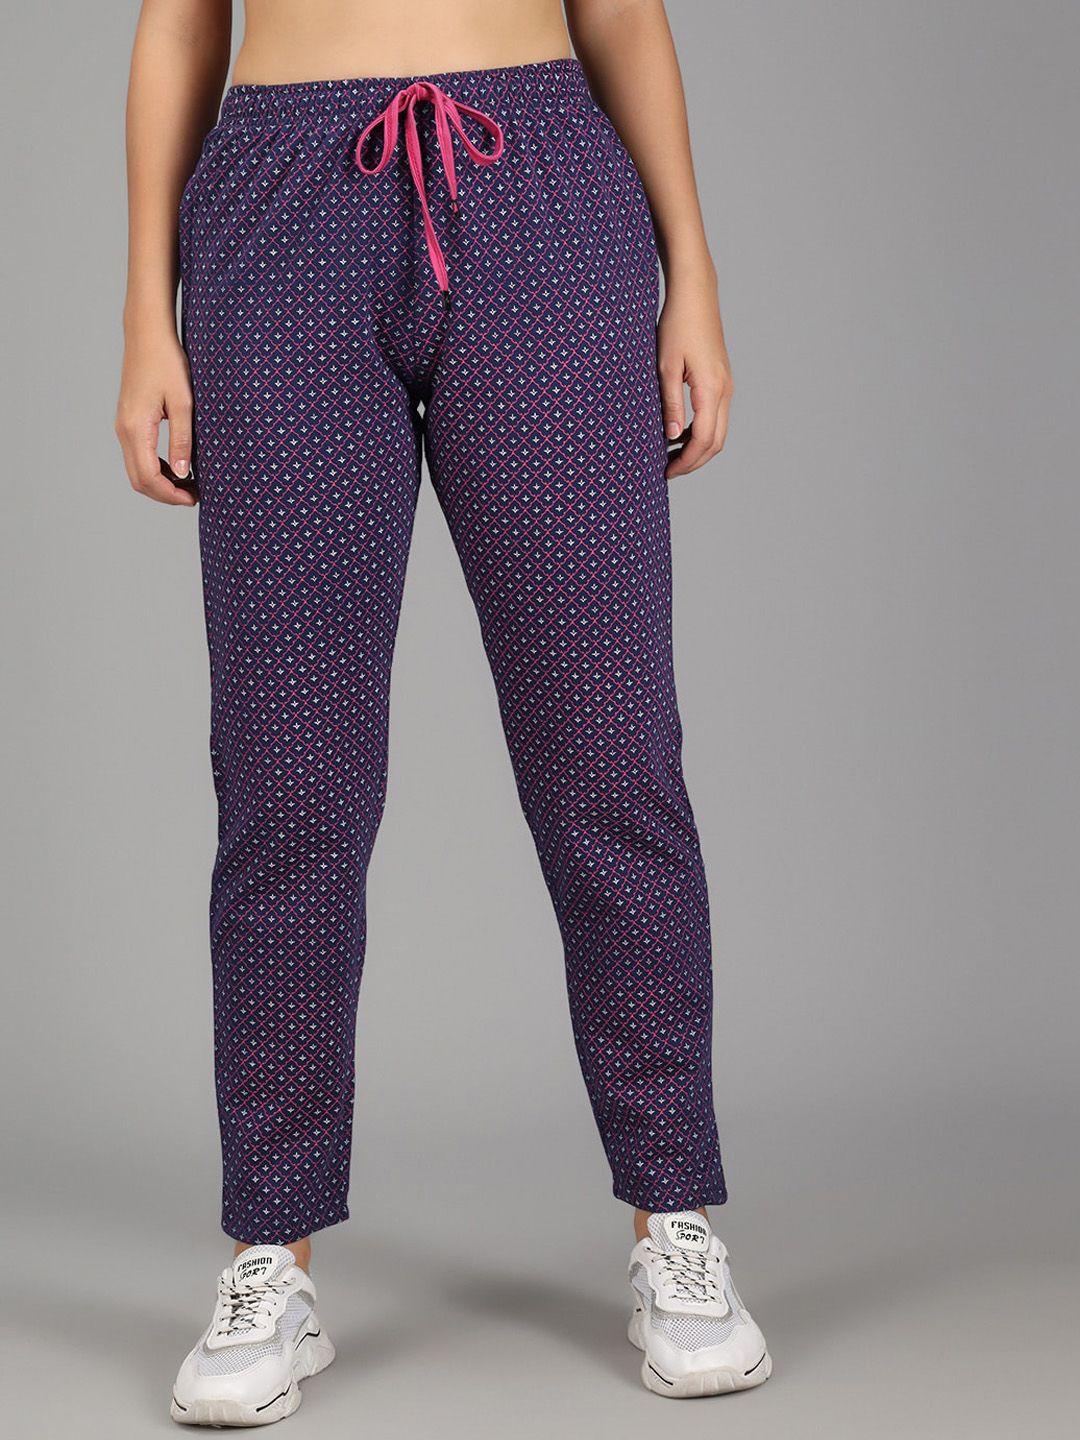 anti culture women navy blue & pink printed cotton track pants